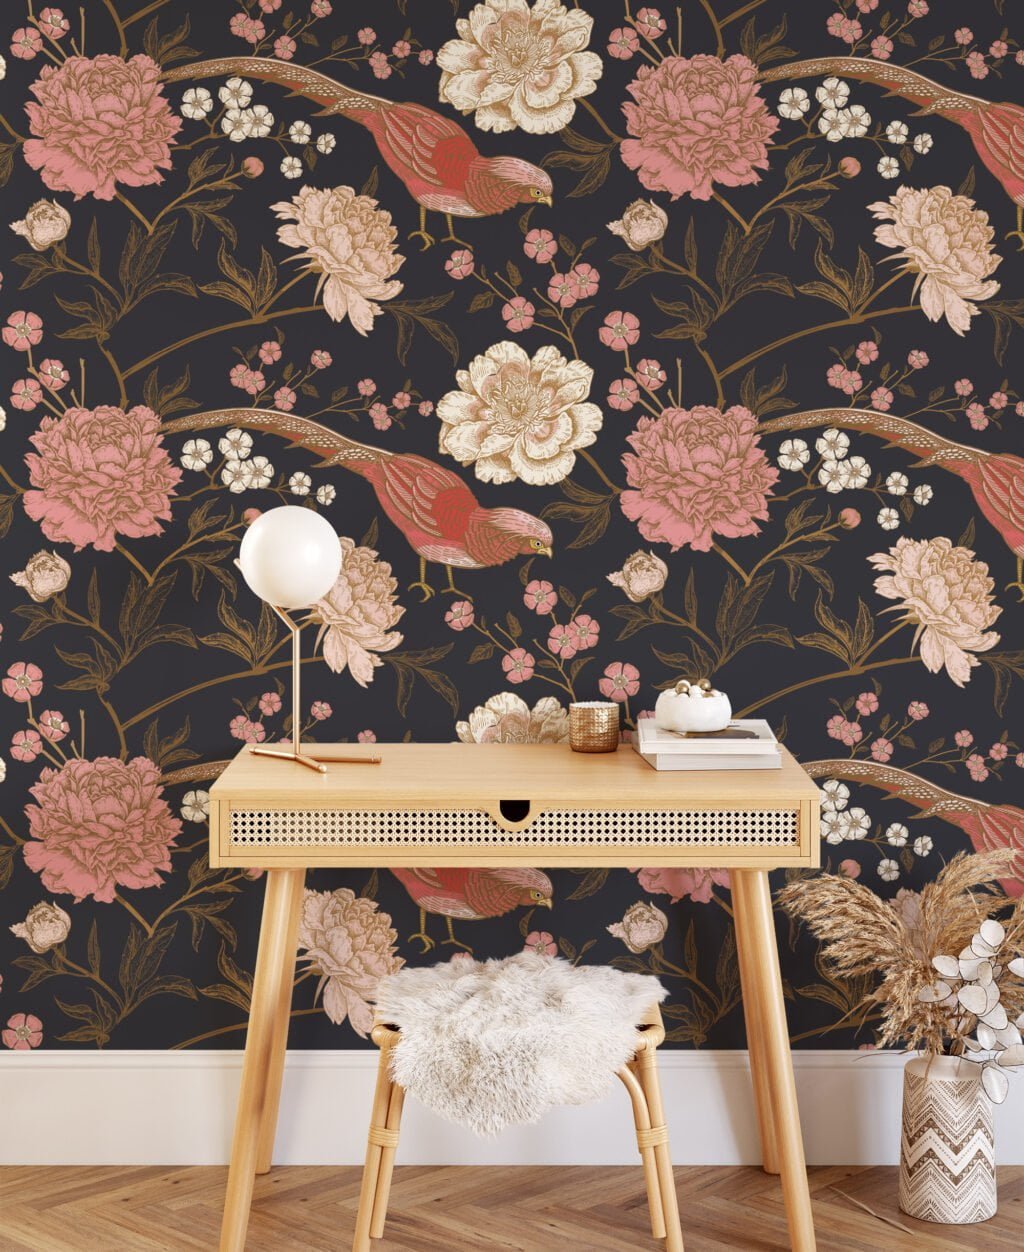 Traditional Style Floral Wallpaper With Rose Pink Birds and A Dark Background Wallpaper, Vintage Elegant Peel & Stick Wall Mural